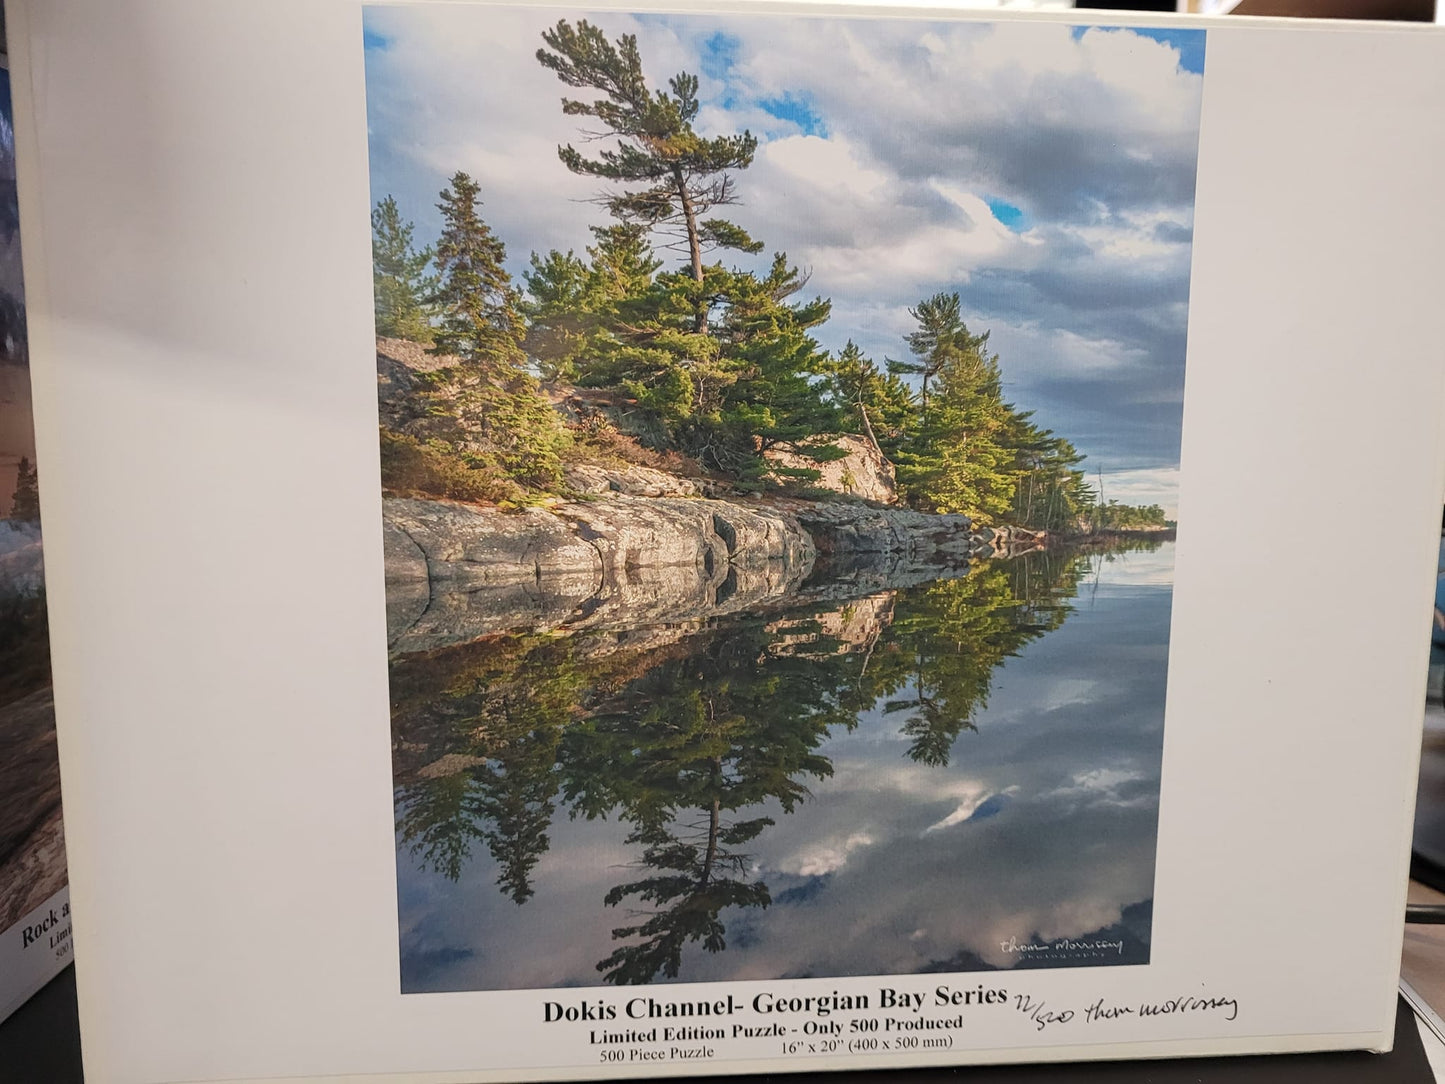 Georgian Bay Series: Dokis Channel 500pc Puzzle